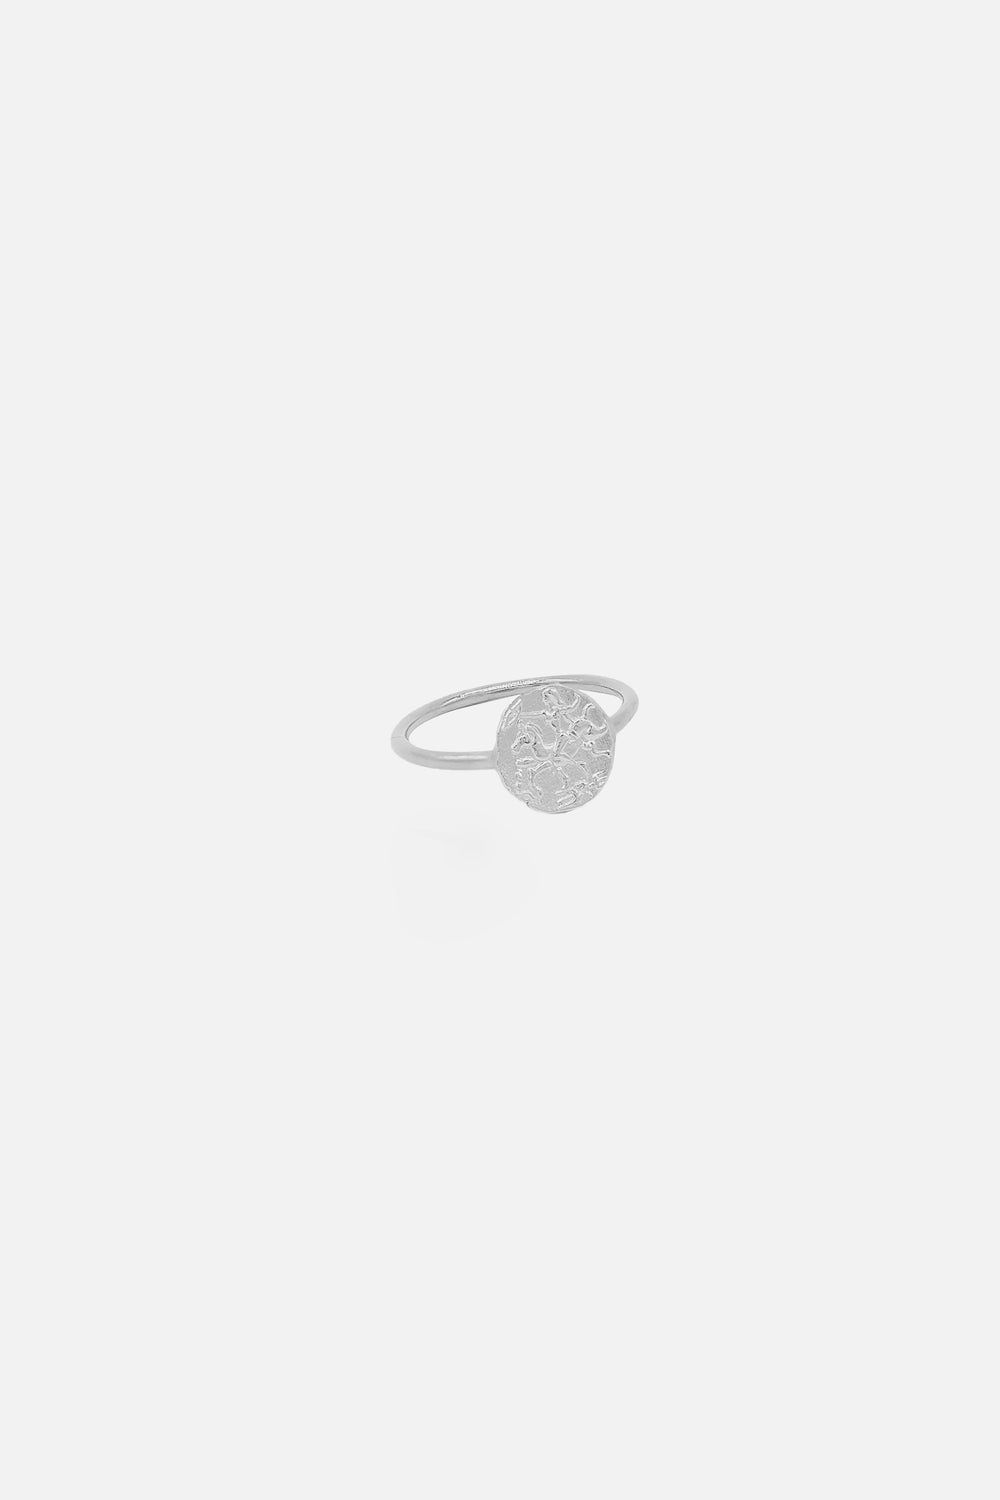 Mini Coin Ring | Silver or 9K White Gold